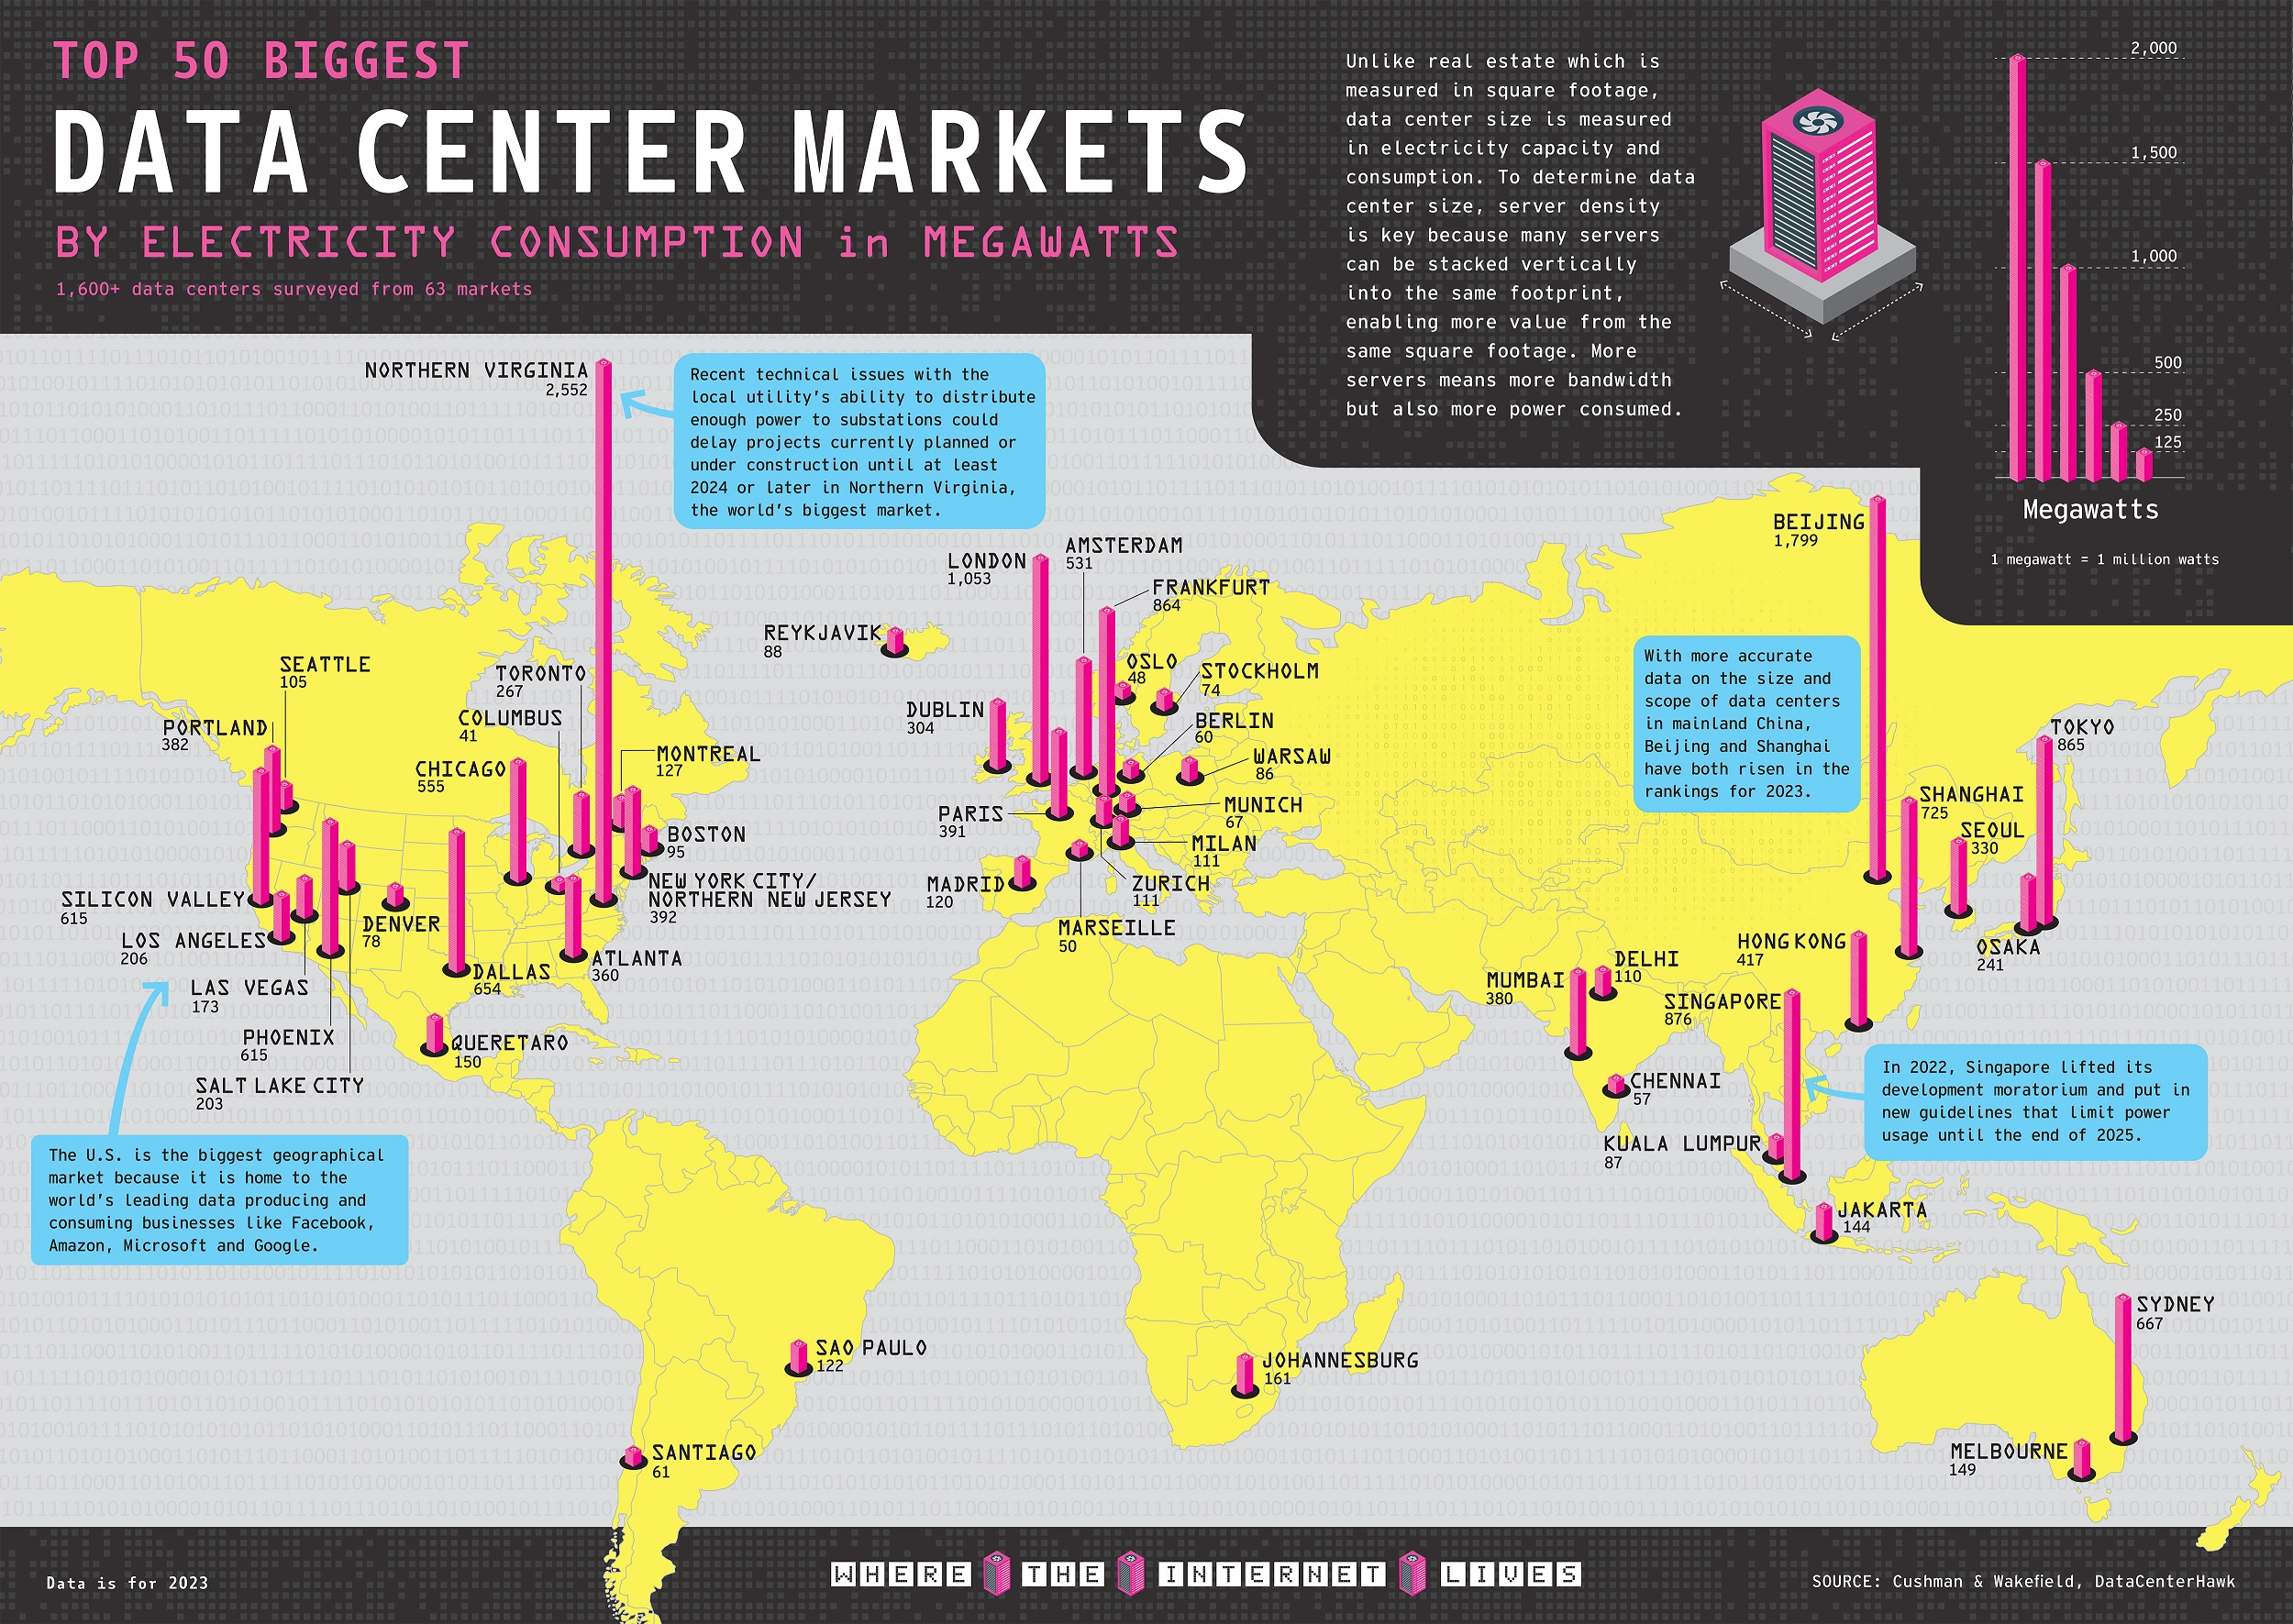 Ranked: Top 50 Data Center Markets by Power Consumption